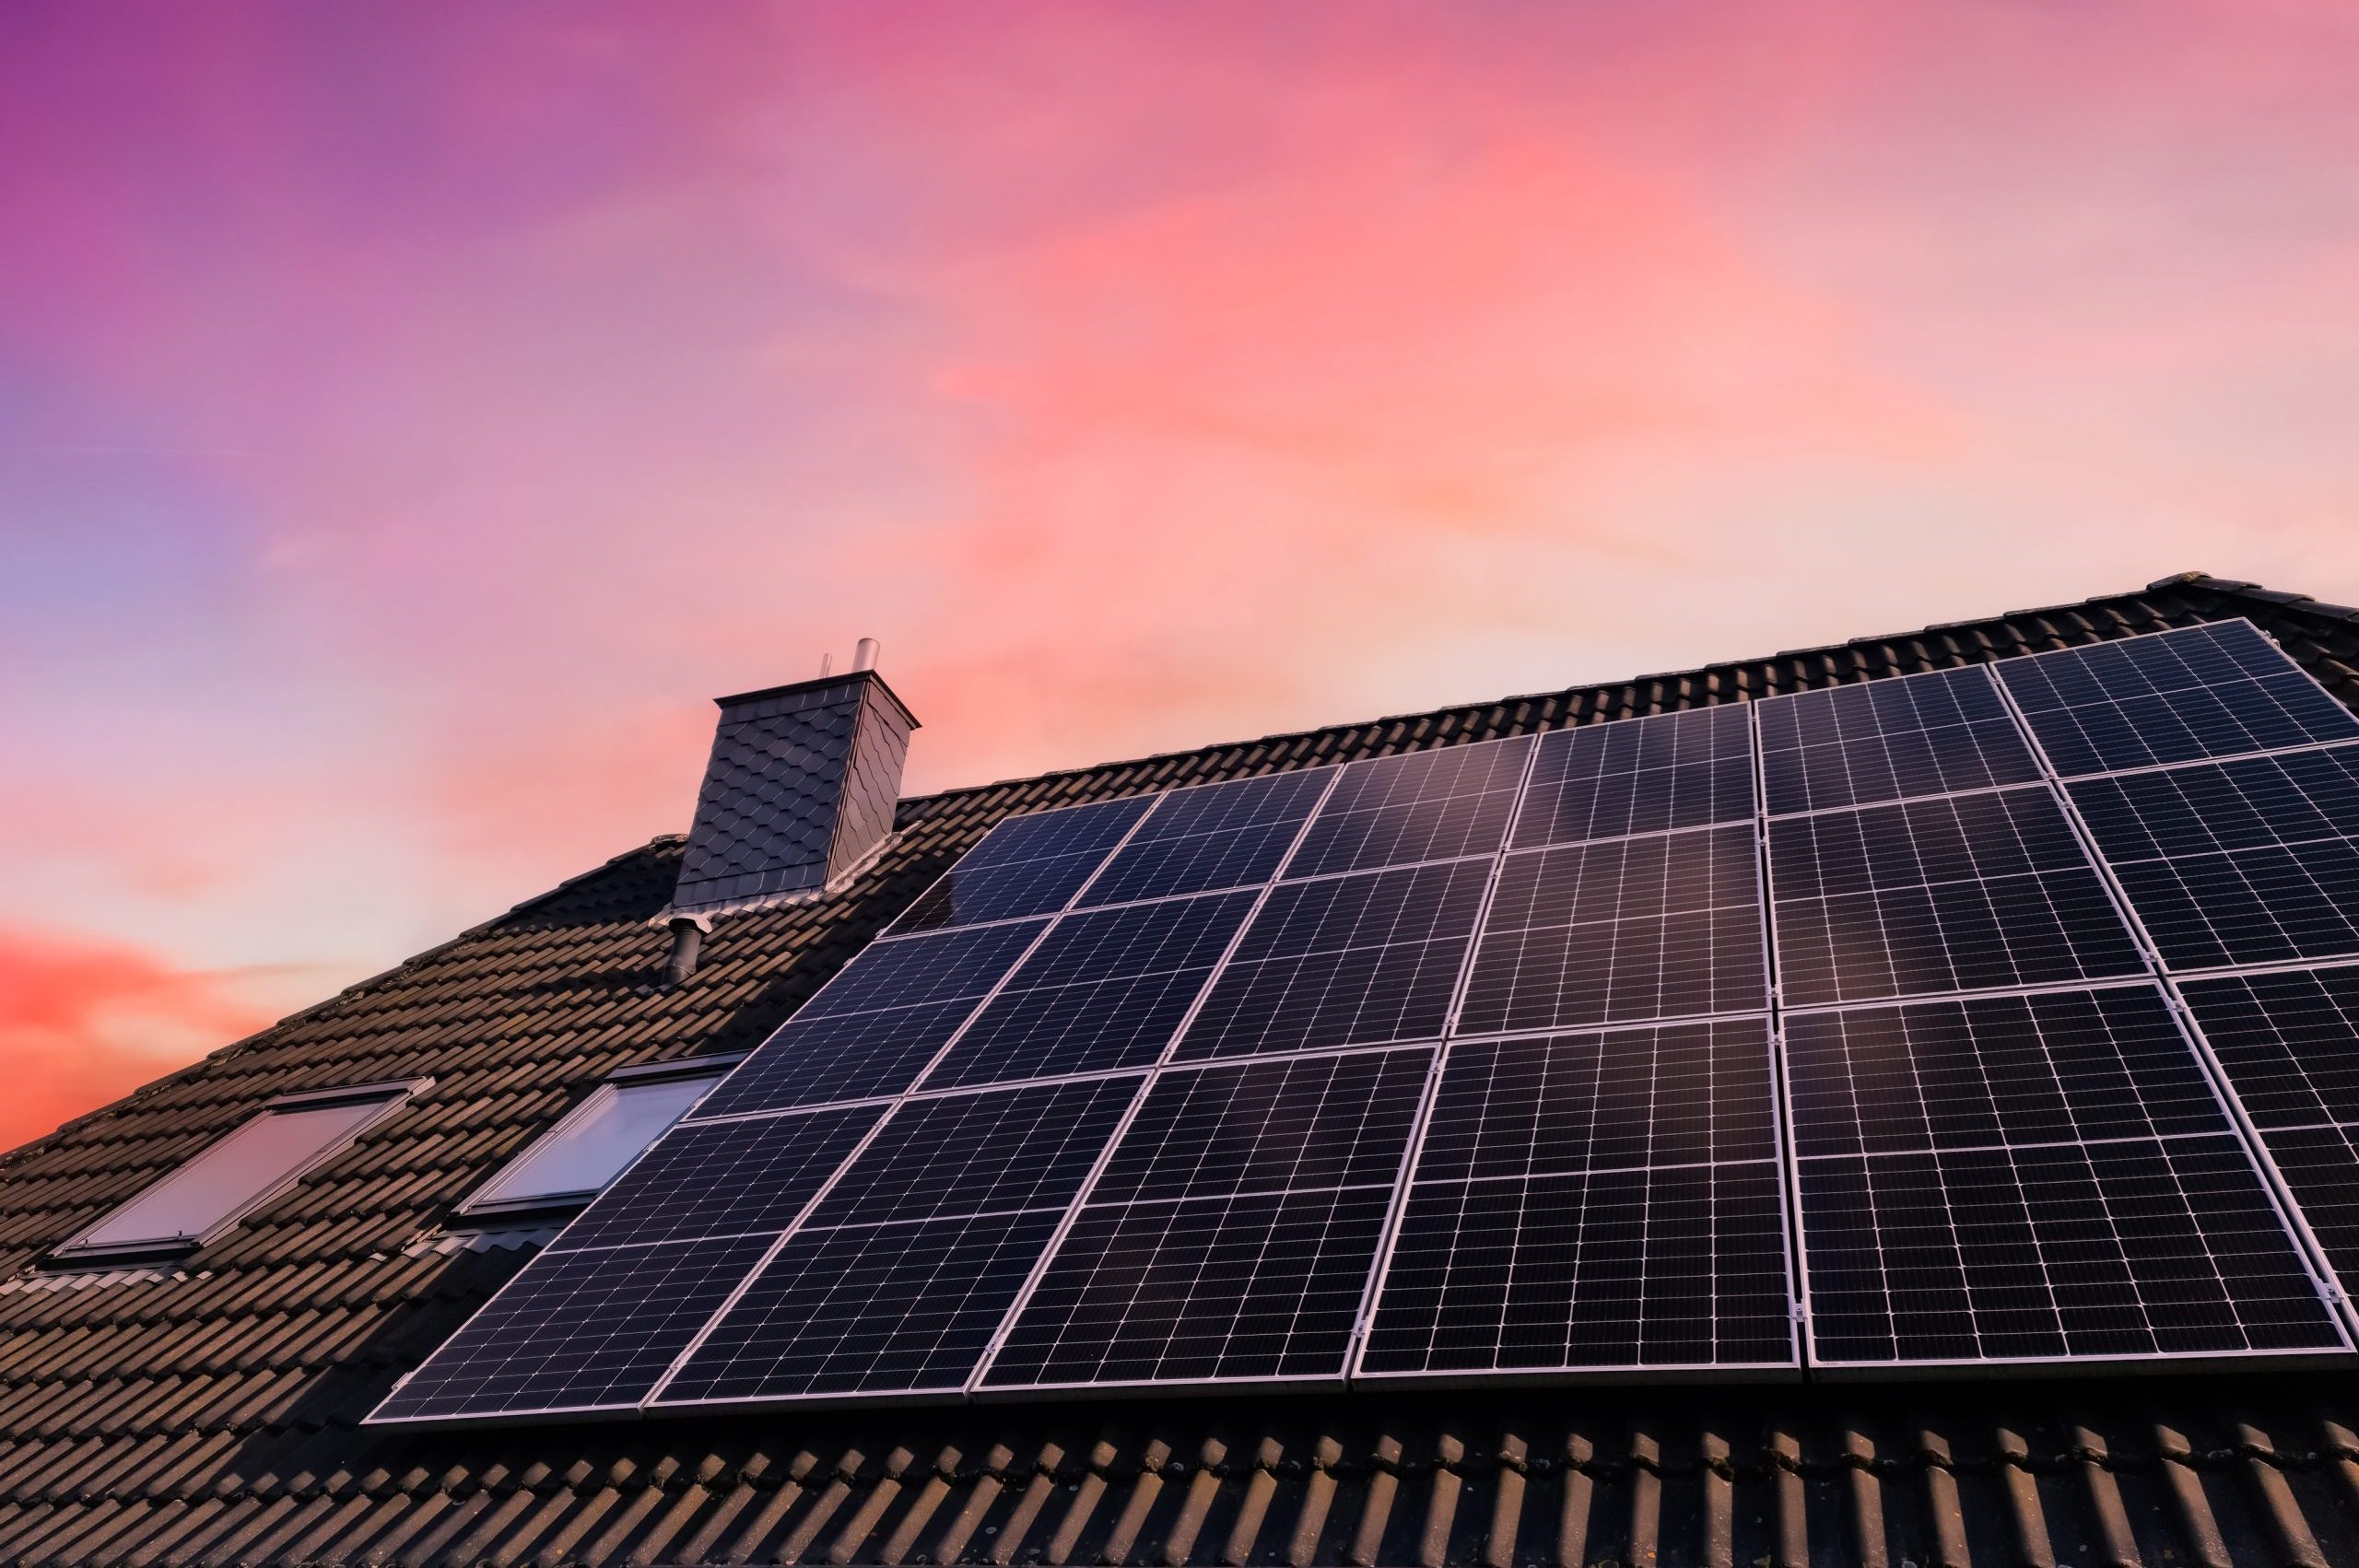 A solar panel system on a roof at sunset